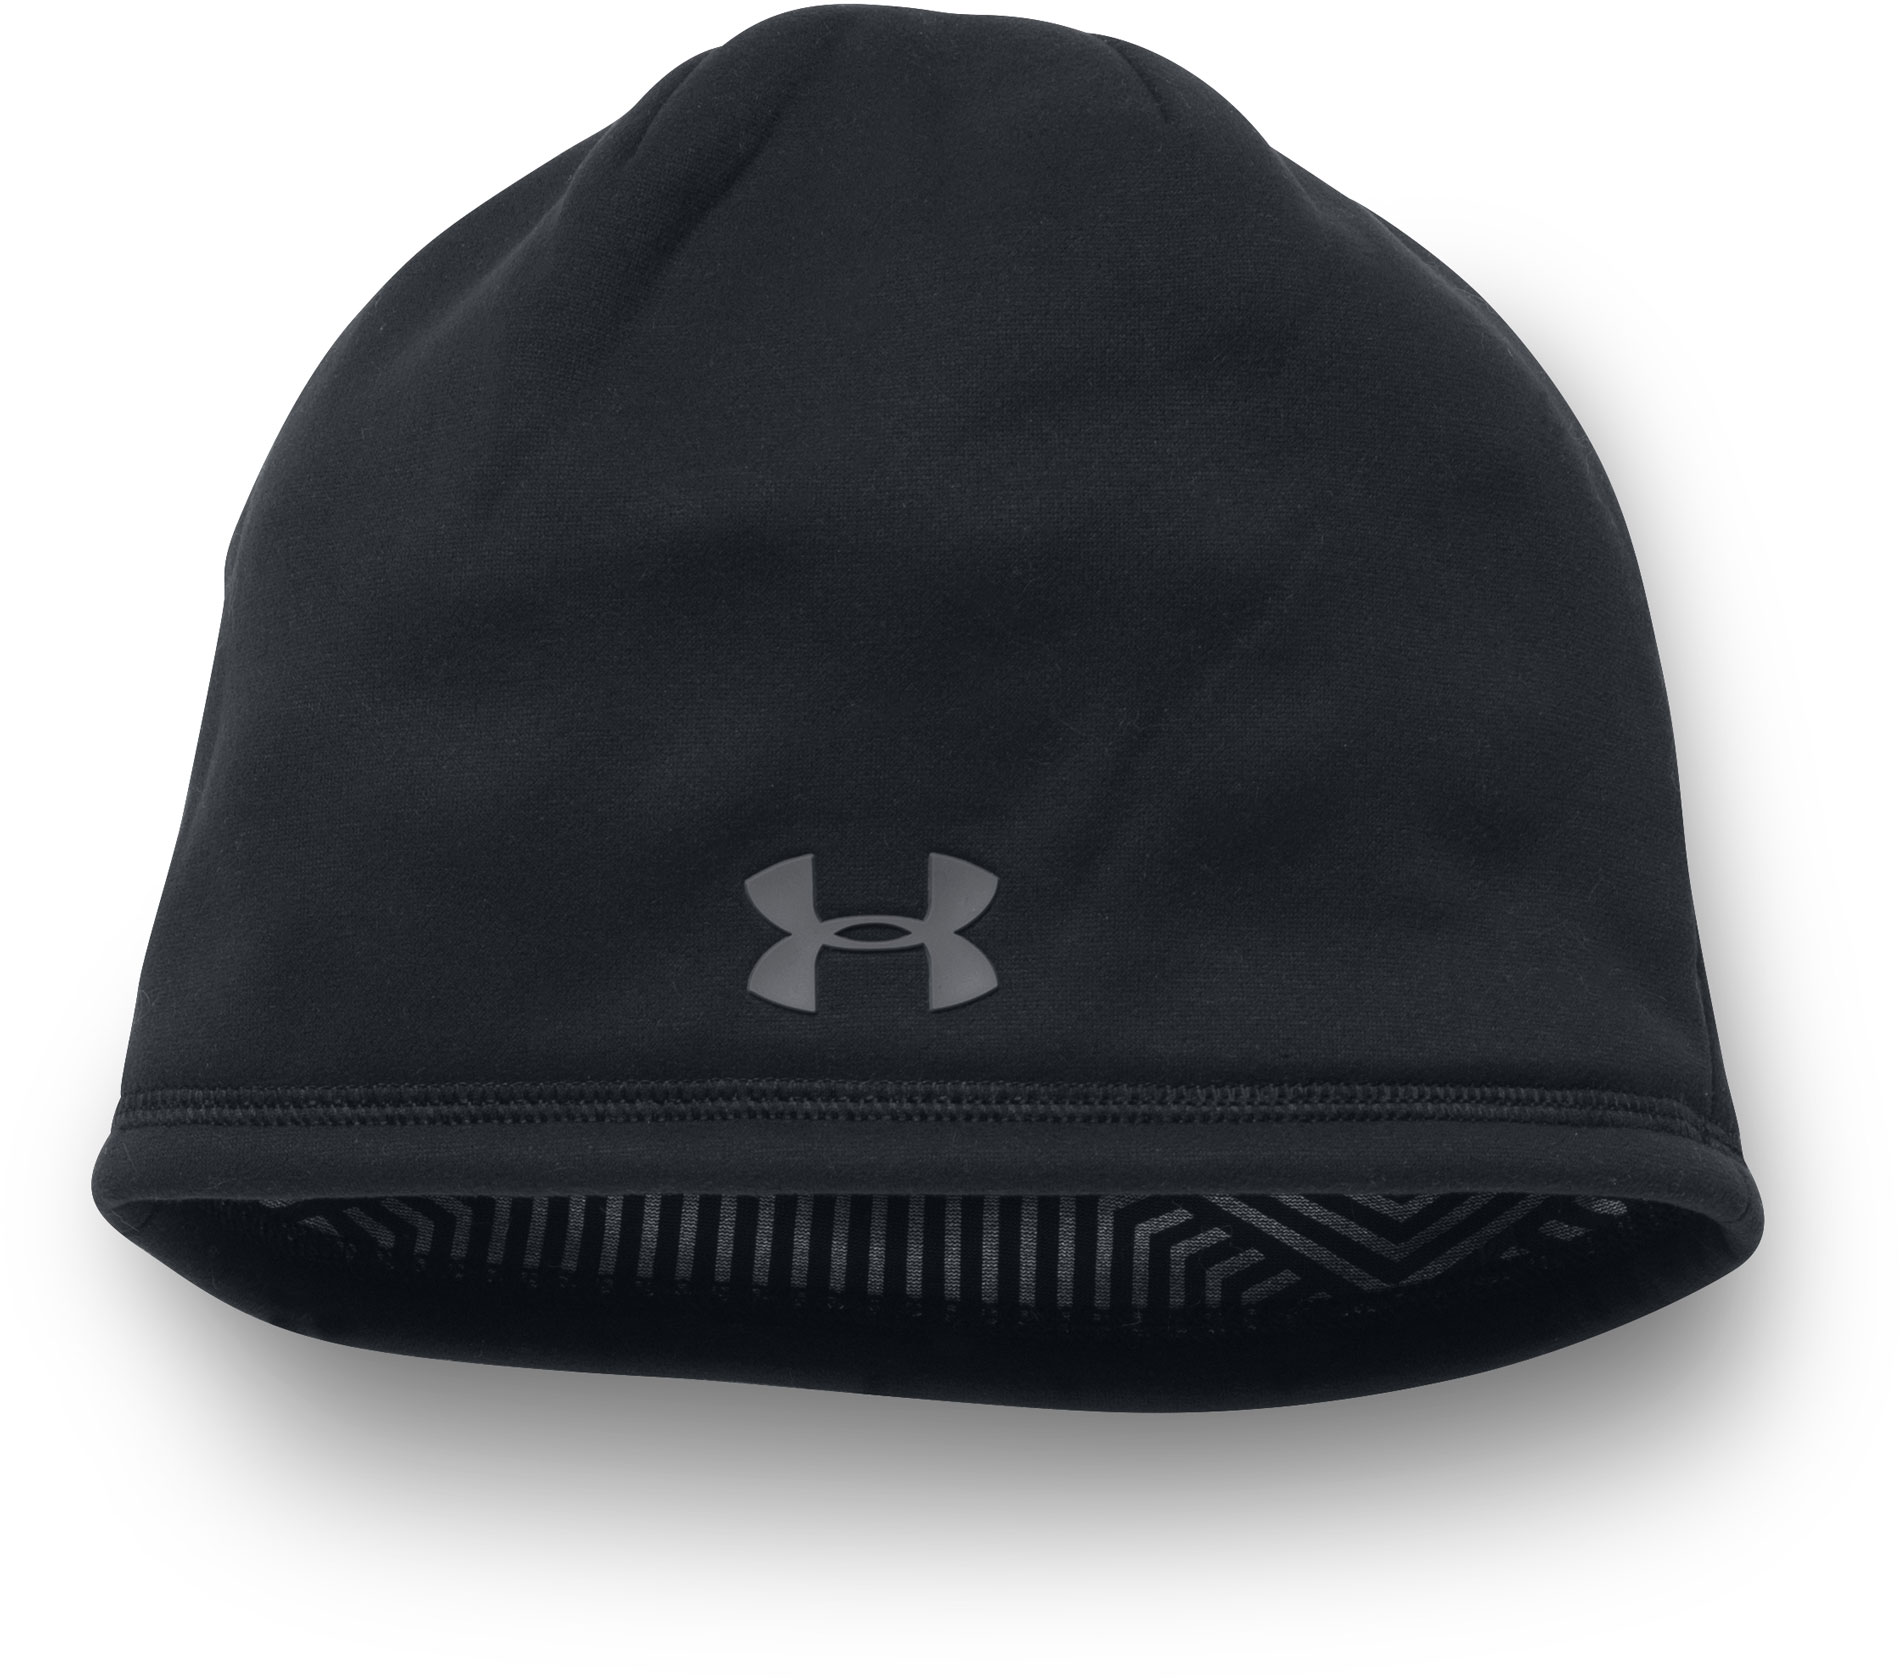 https://i.sportisimo.com/products/images/435/435913/full/under-armour-mens-elements-2-0-beanie_4.jpg